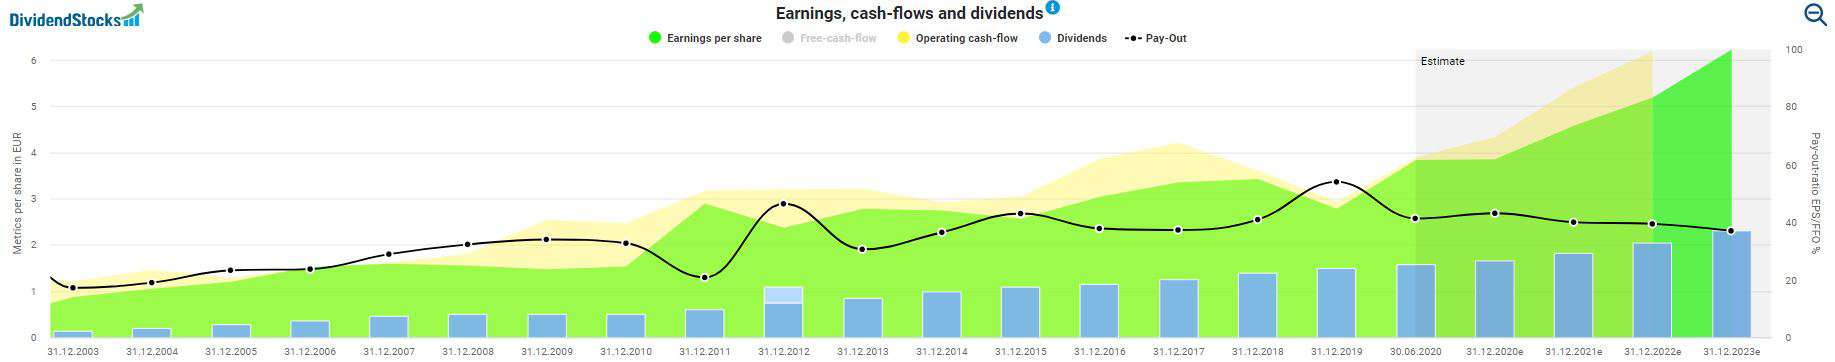 Development of earnings, cash-flows and dividends of the SAP stock